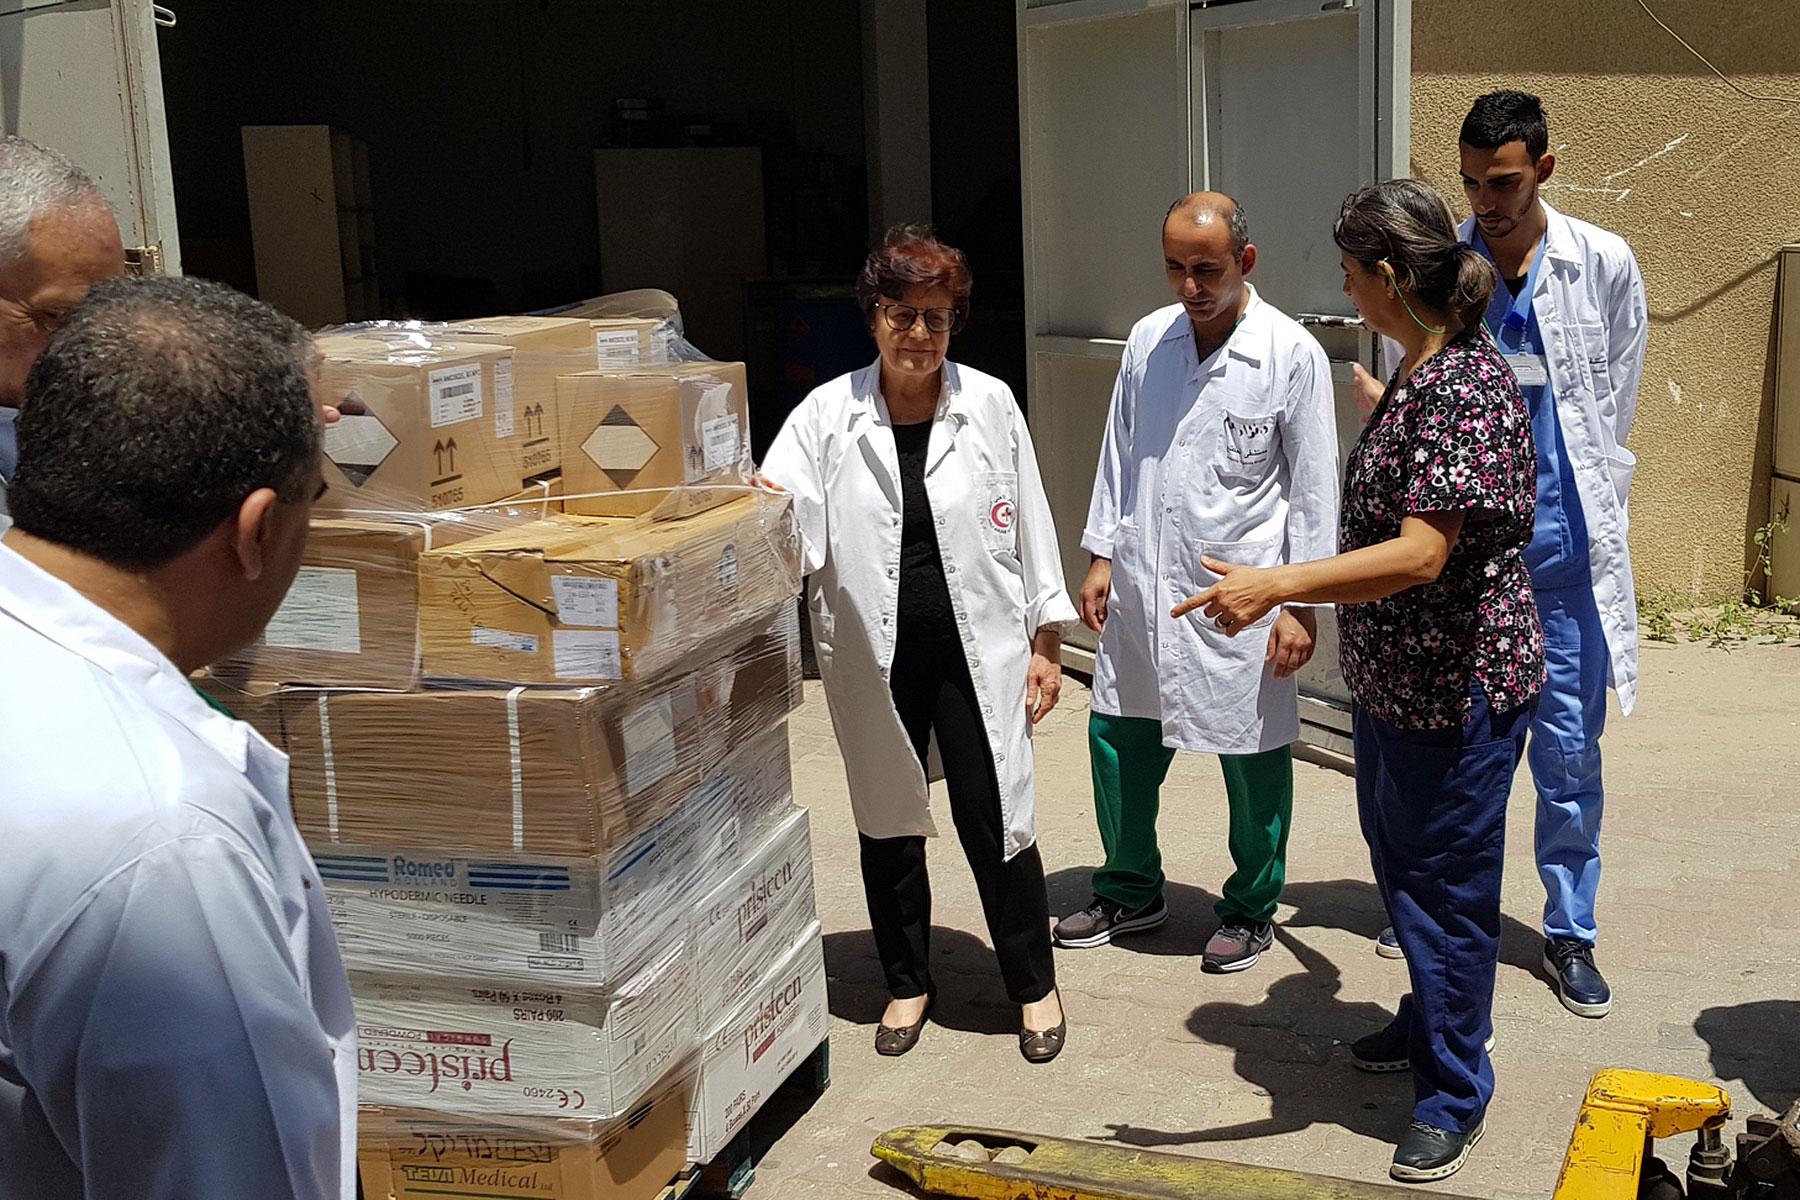 Churches and agencies are calling on the U.S. government âto extend compassion and help to those who are in needâ at this time of global pandemic. Photo: LWF/ Shaban Mortaja (Juzoor Gaza)